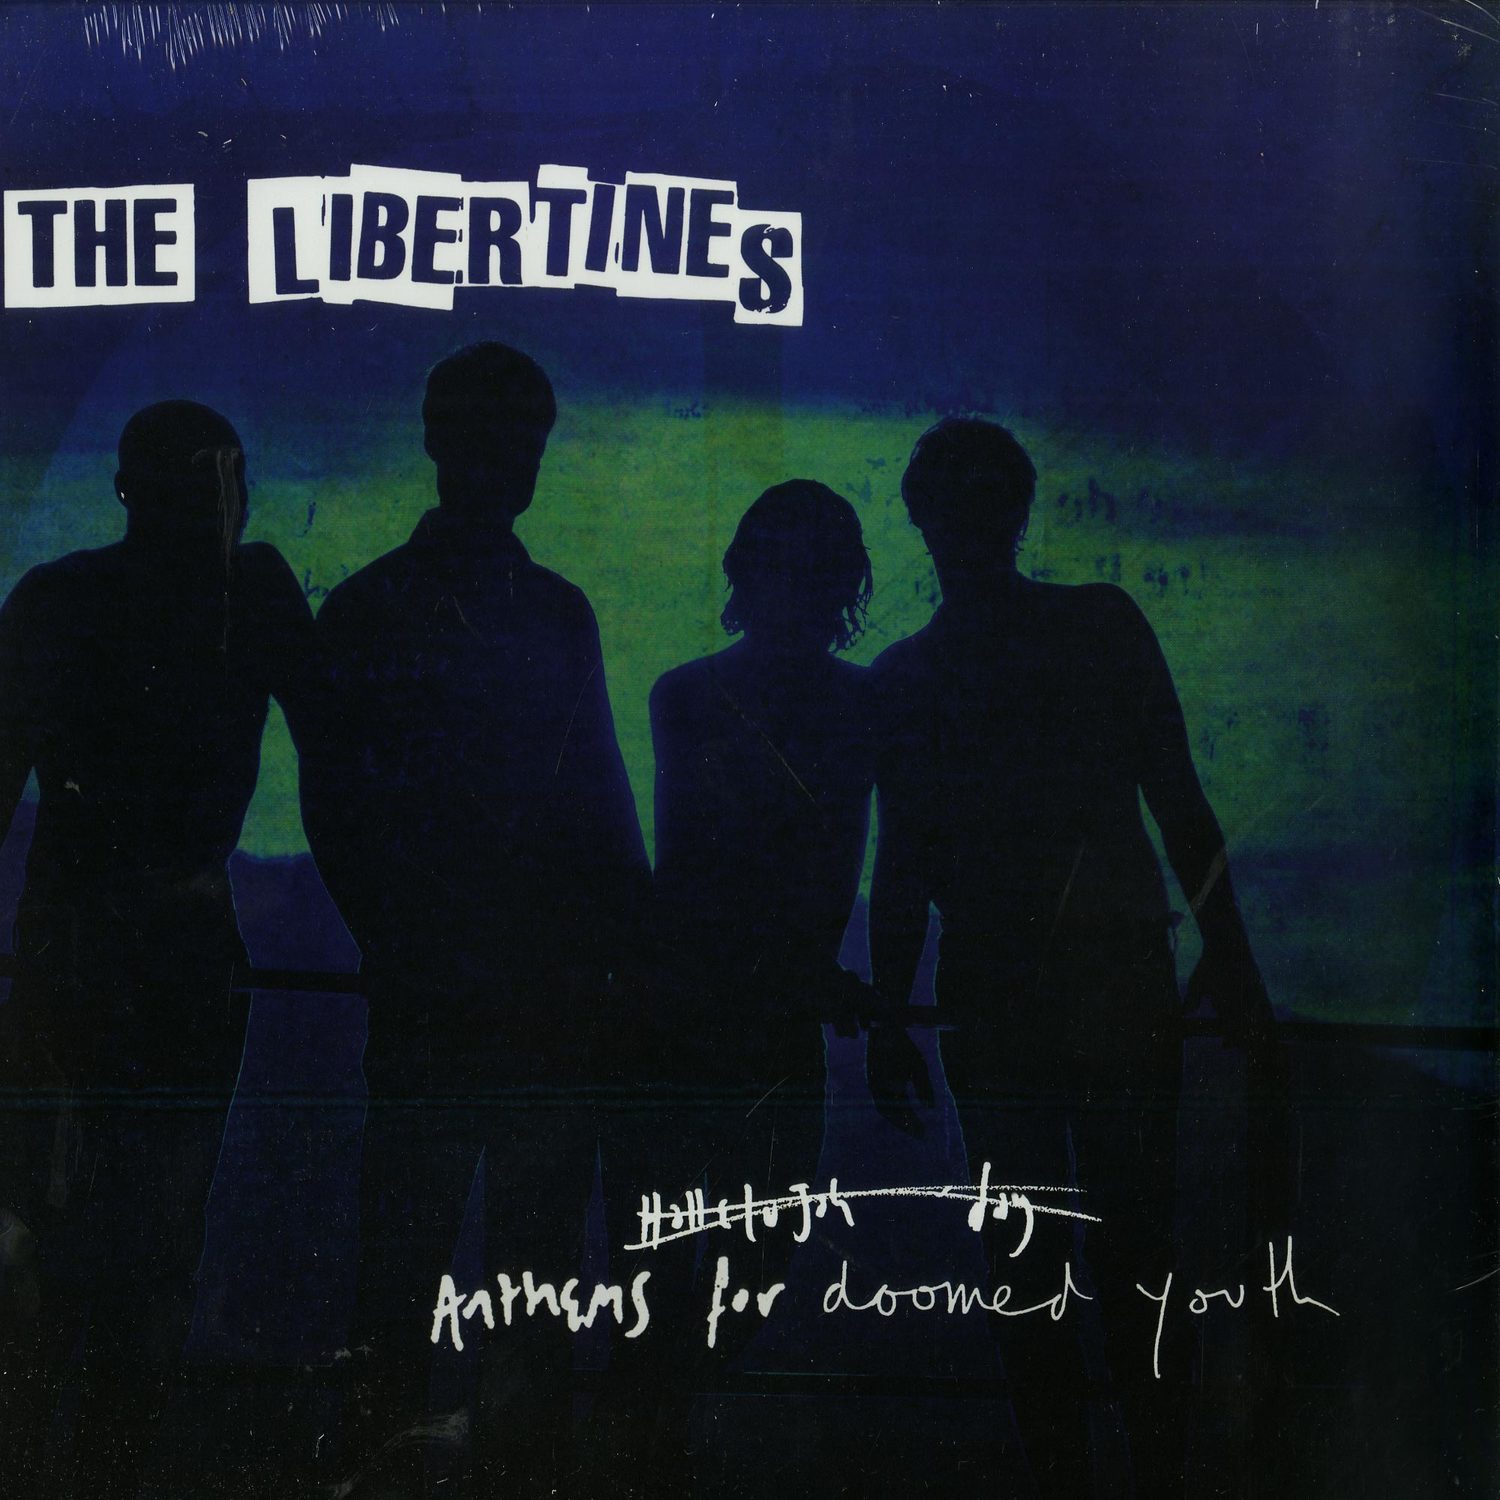 The Libertines - ANTHEMS FOR DOOMED YOUTH